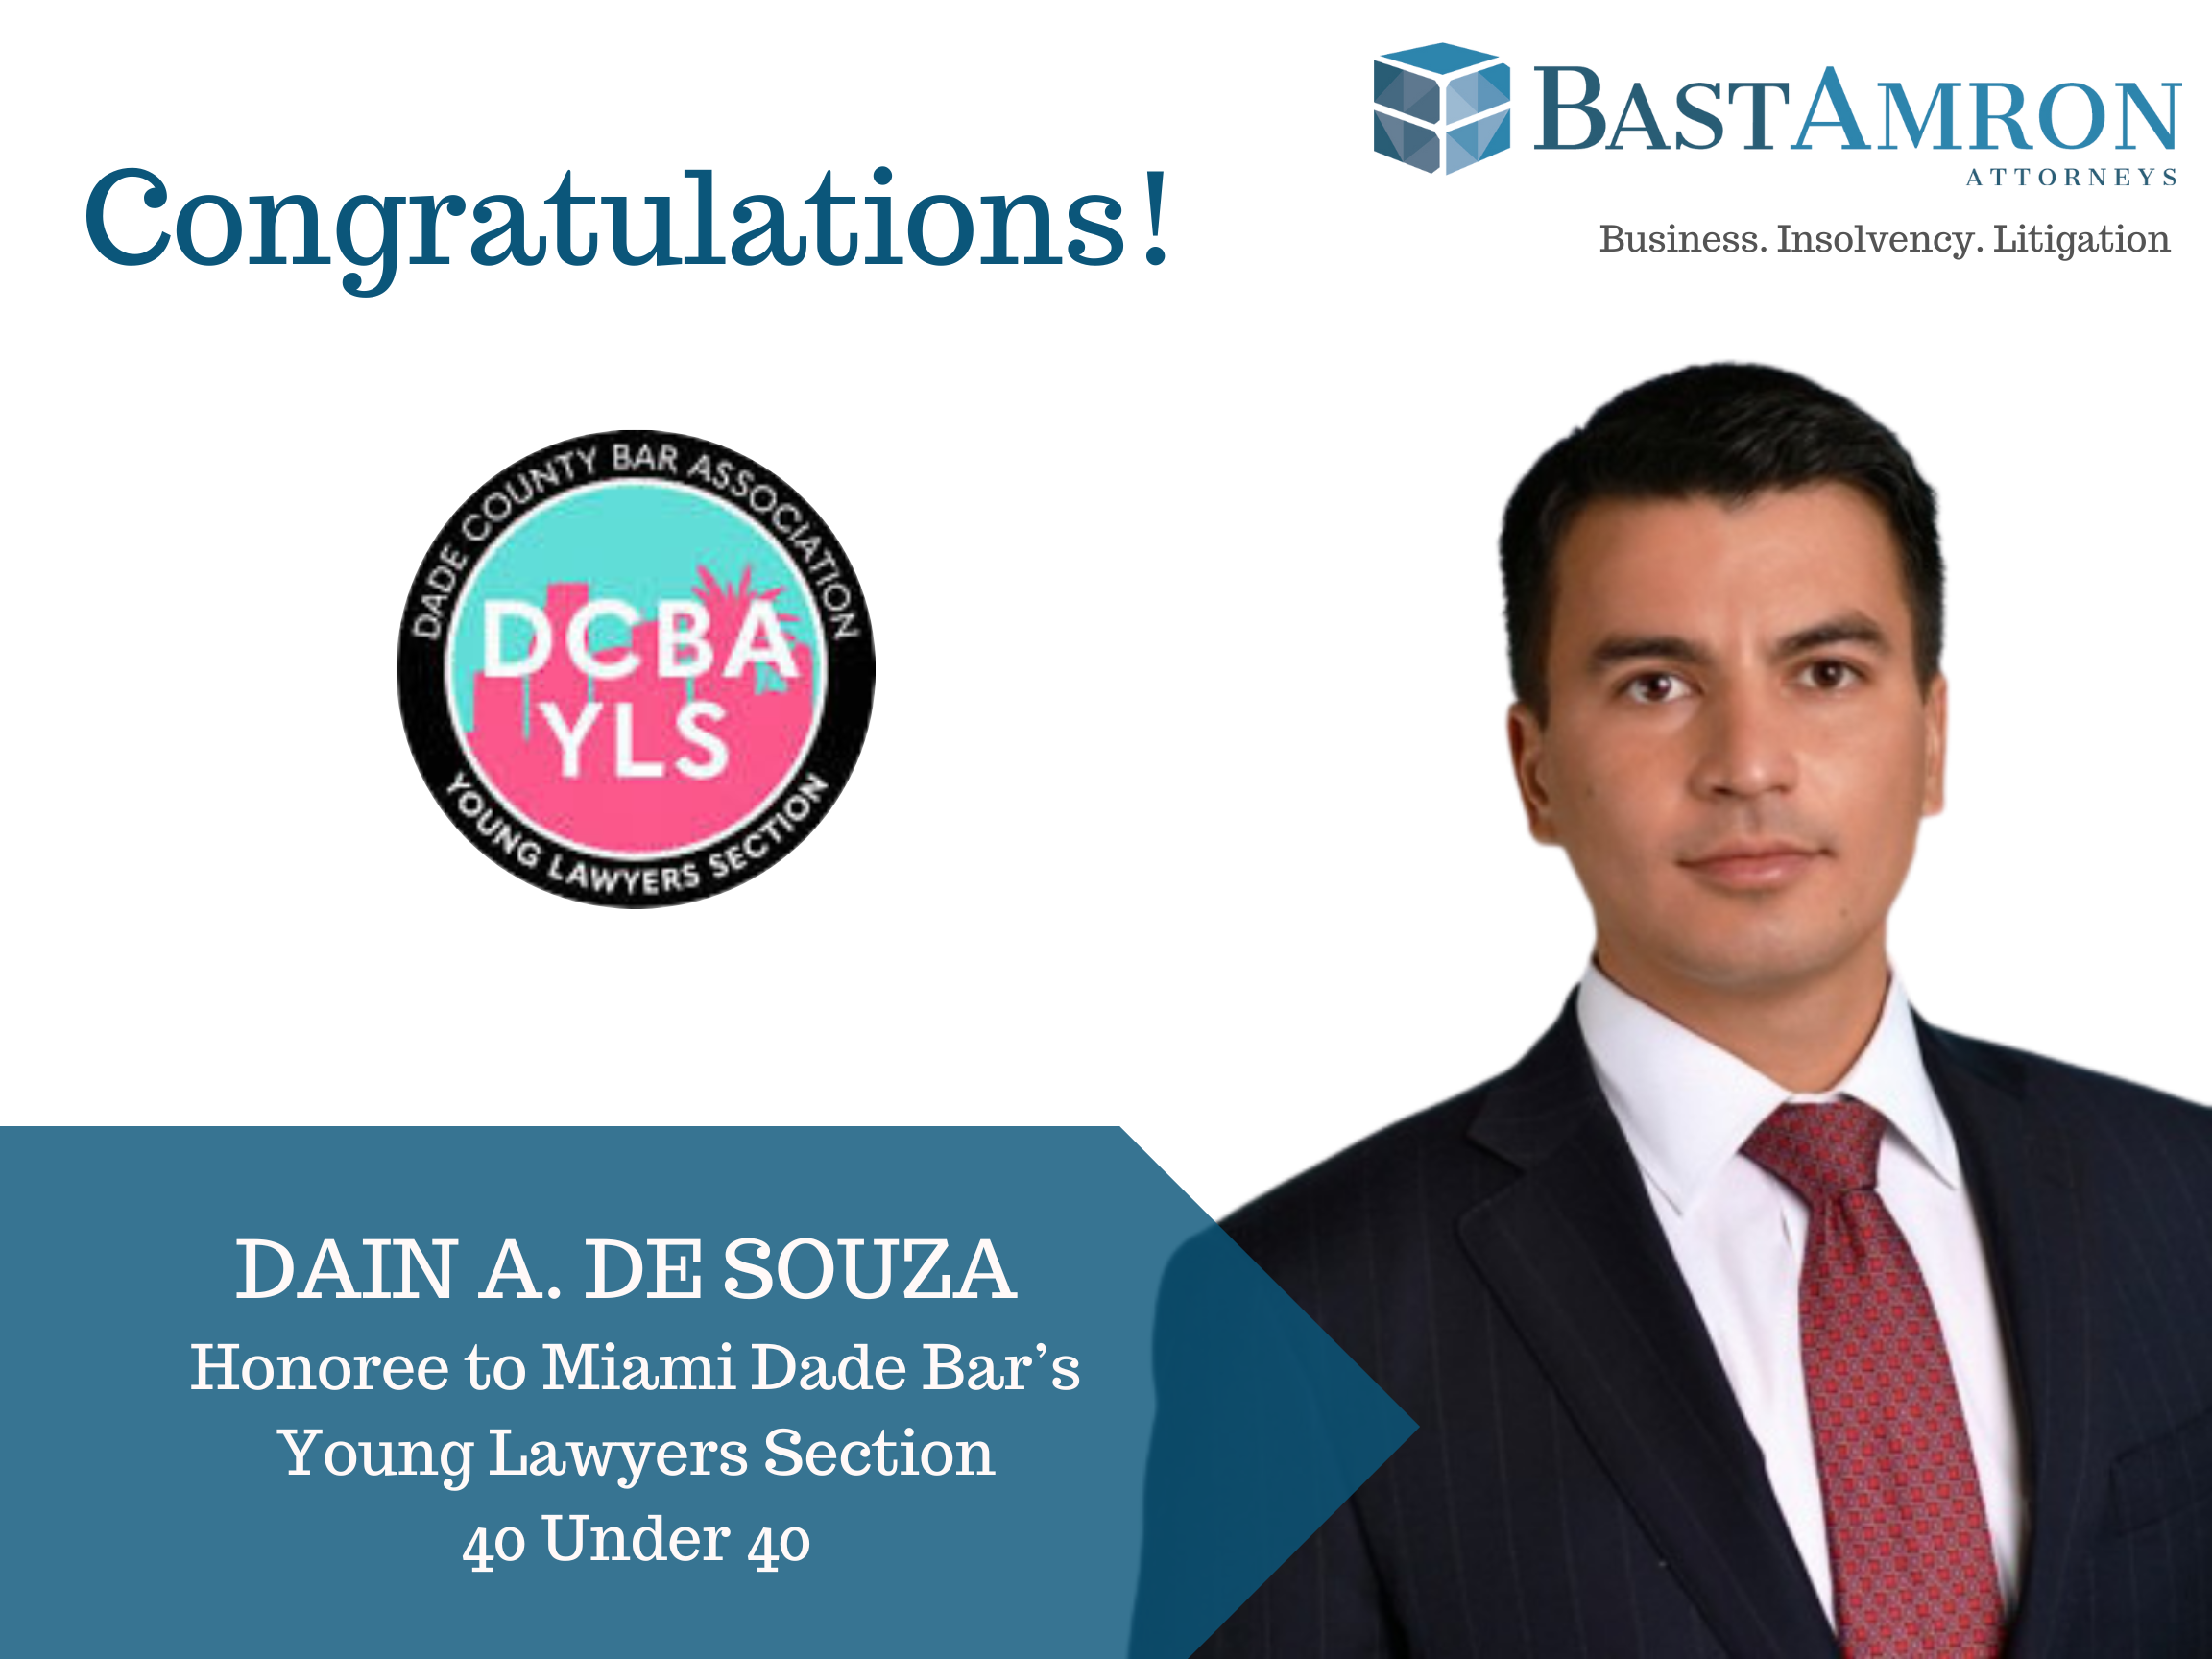 BAST AMRON PARTNER DAIN DE SOUZA, NAMED TO MIAMI DADE BAR’S YOUNG LAWYERS SECTION INAUGURAL 40 UNDER 40